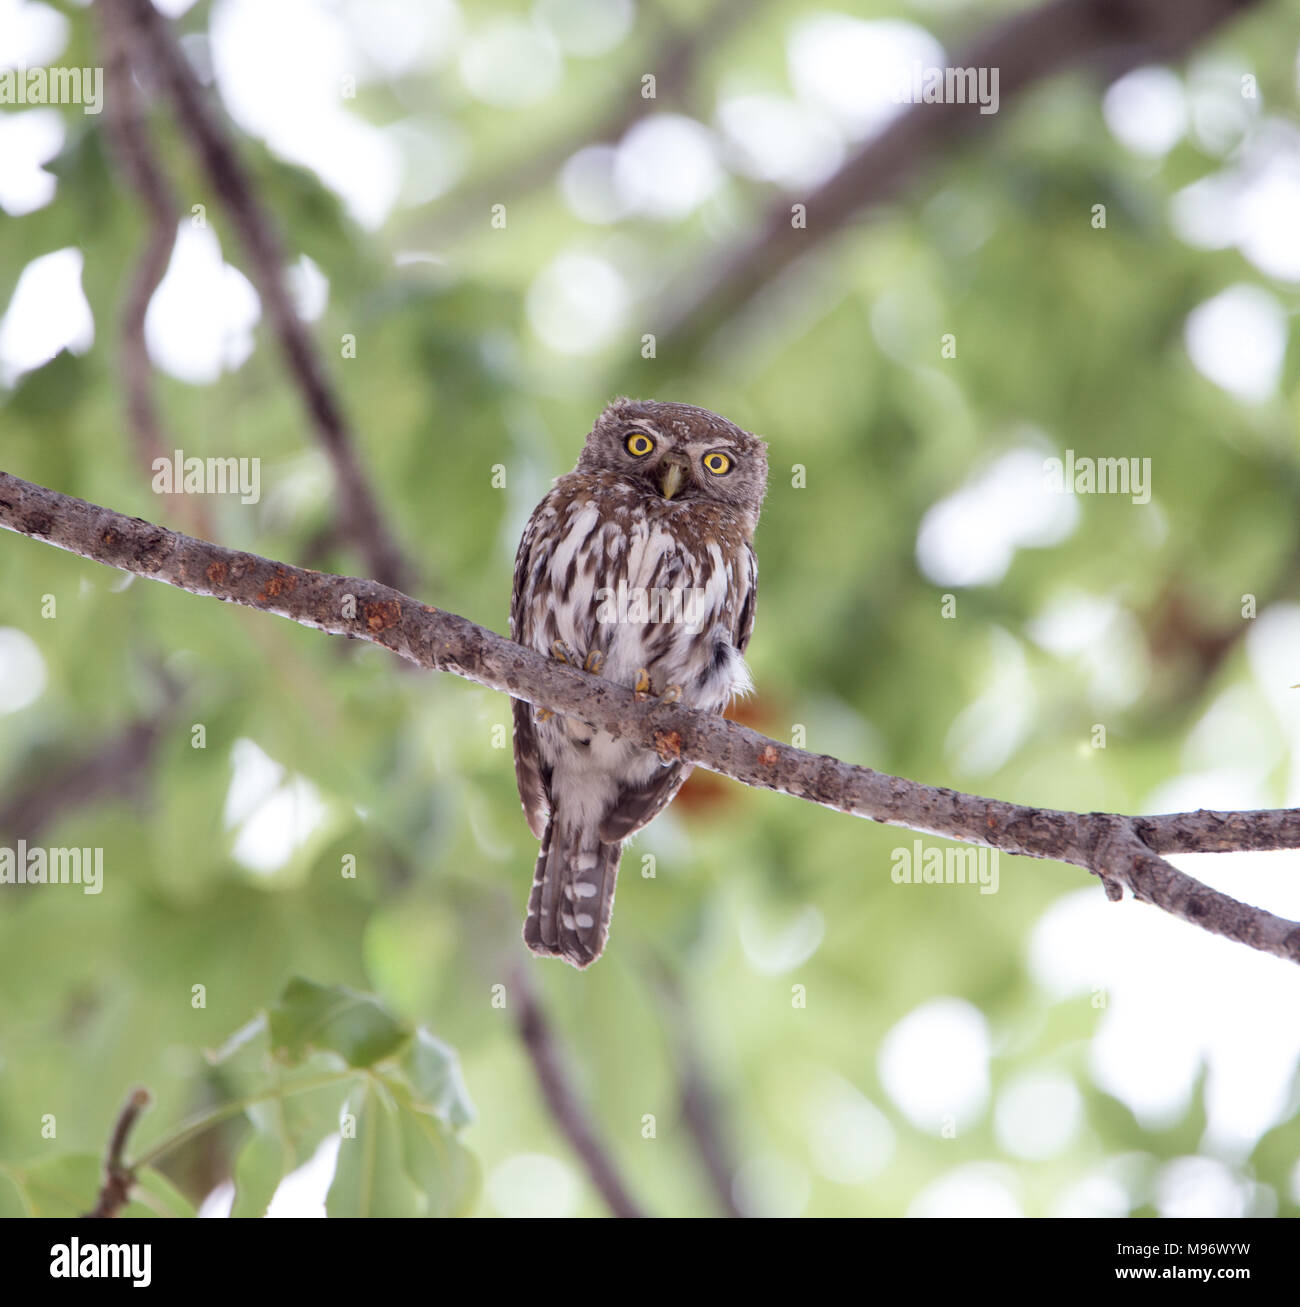 Owlet Pearl-Spotted Banque D'Images